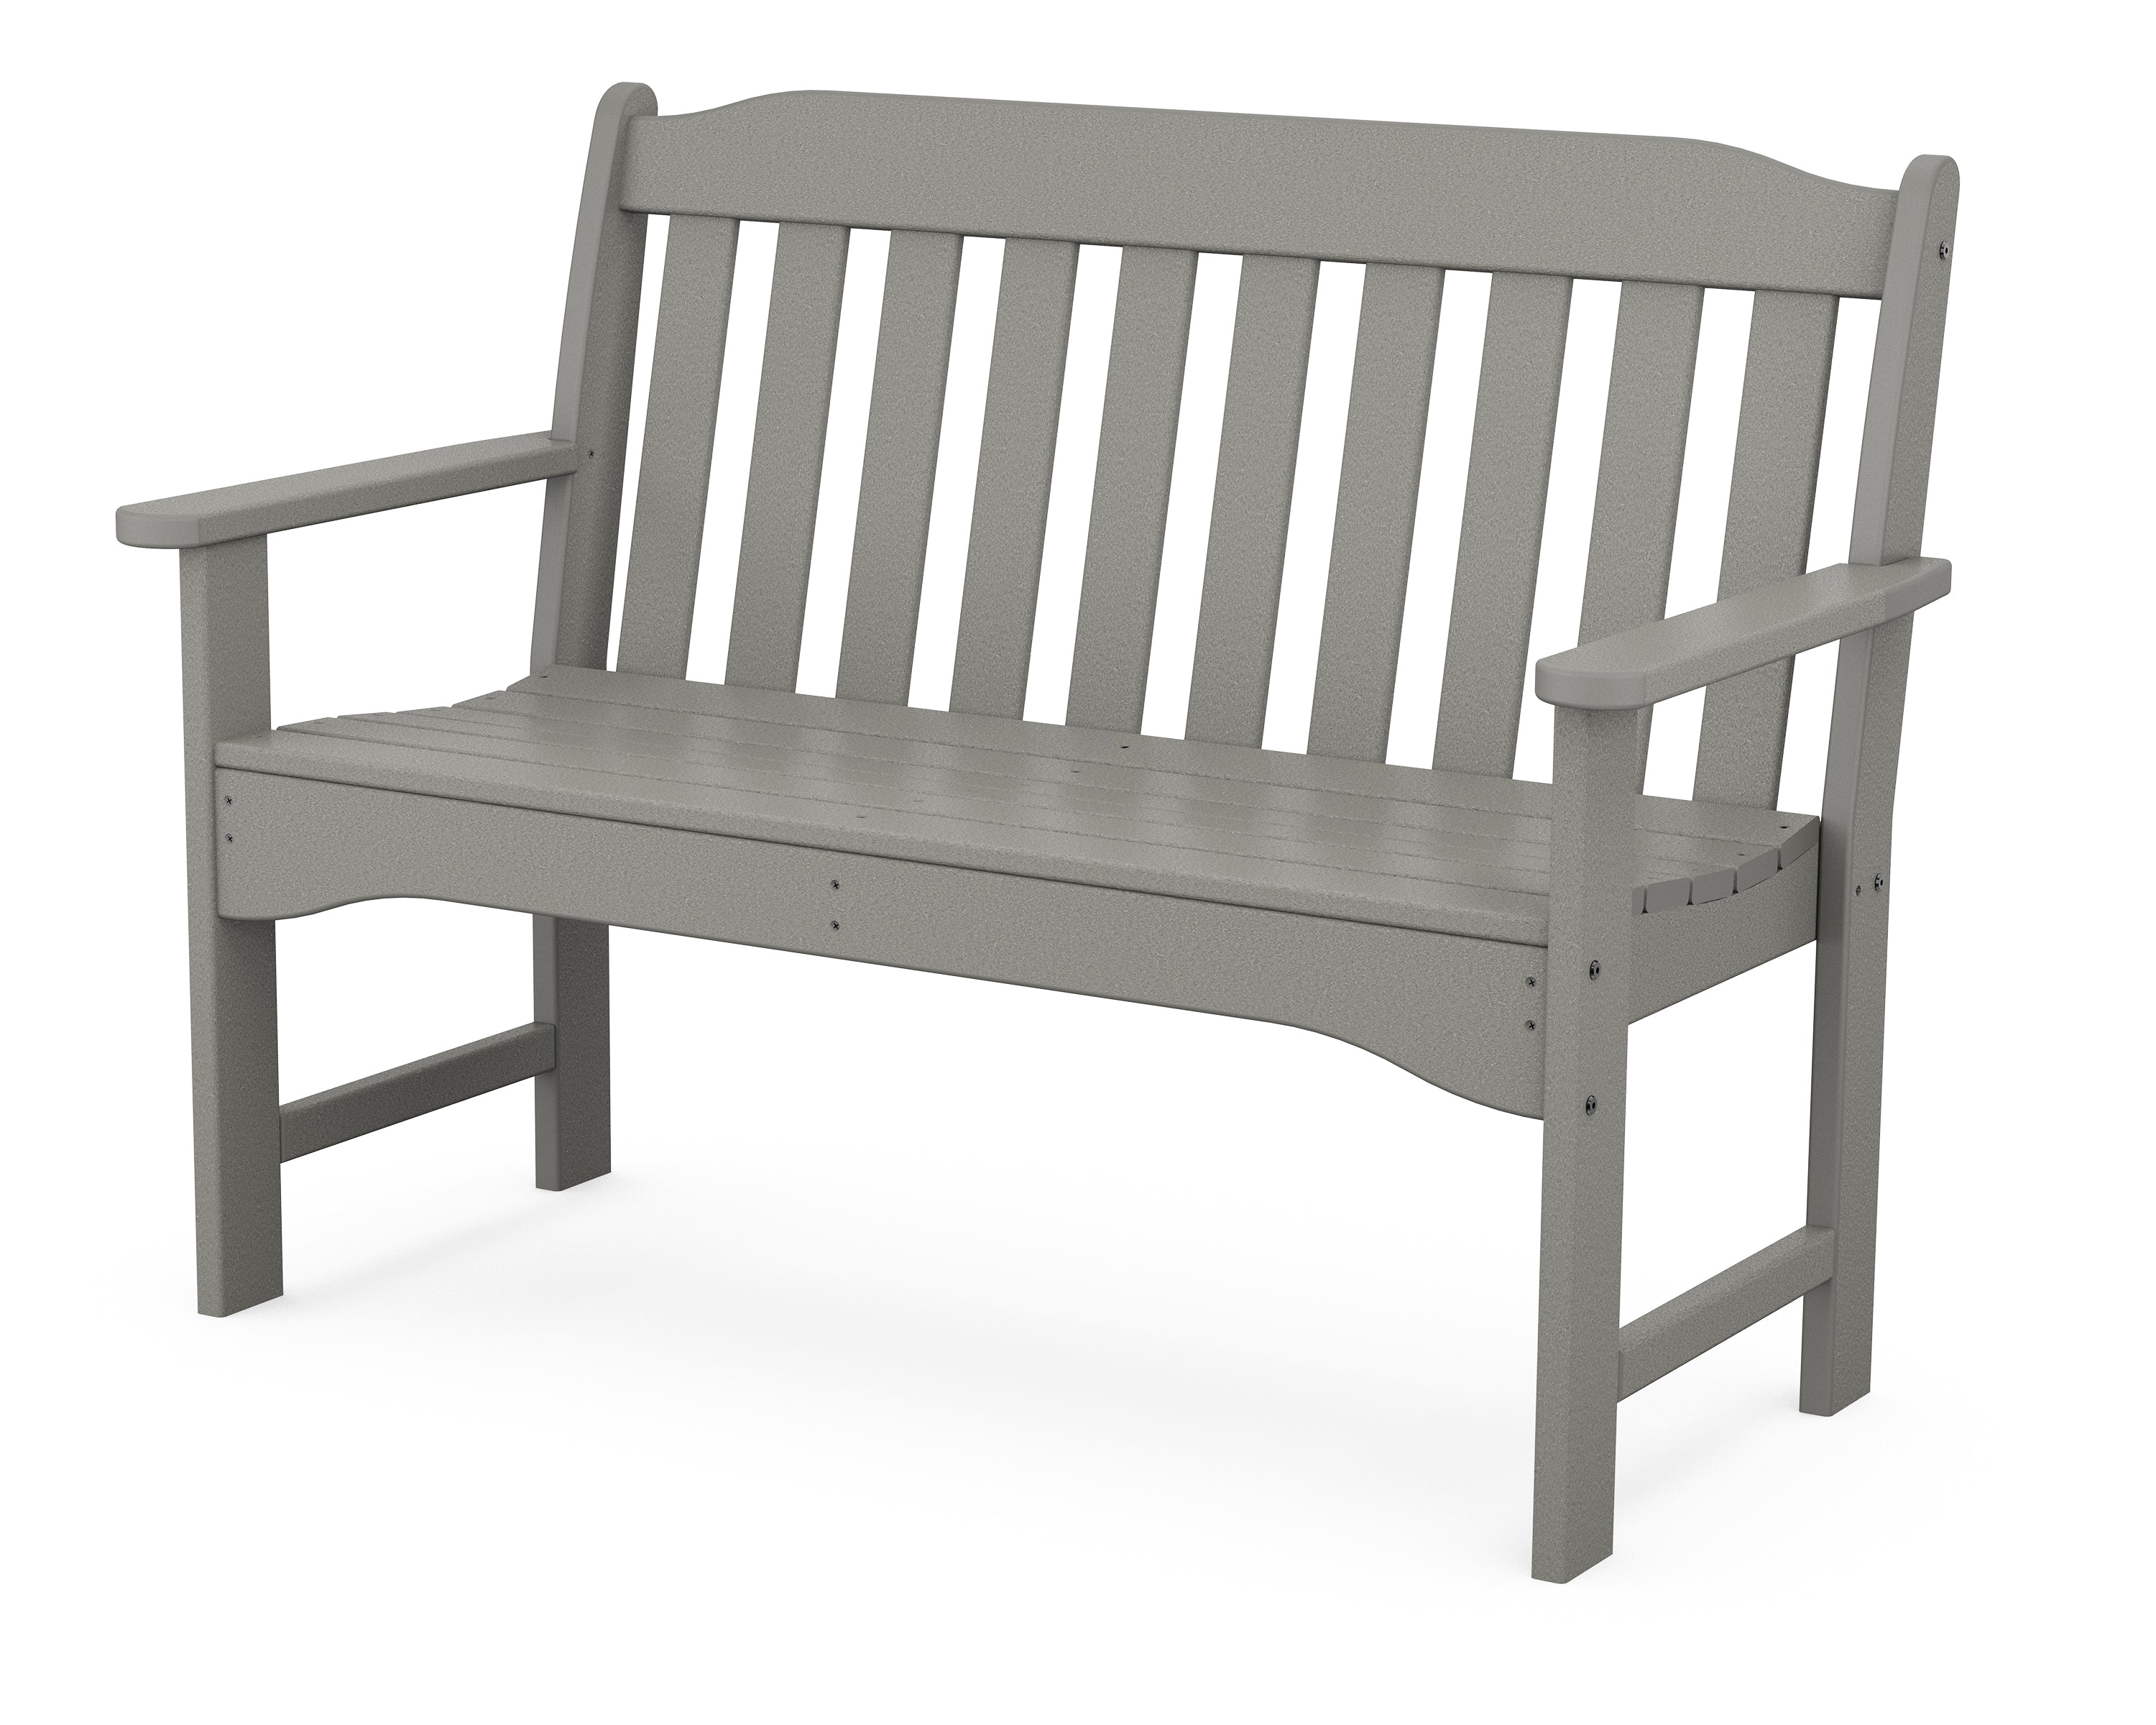 Country Living Country Living 48" Garden Bench in Slate Grey